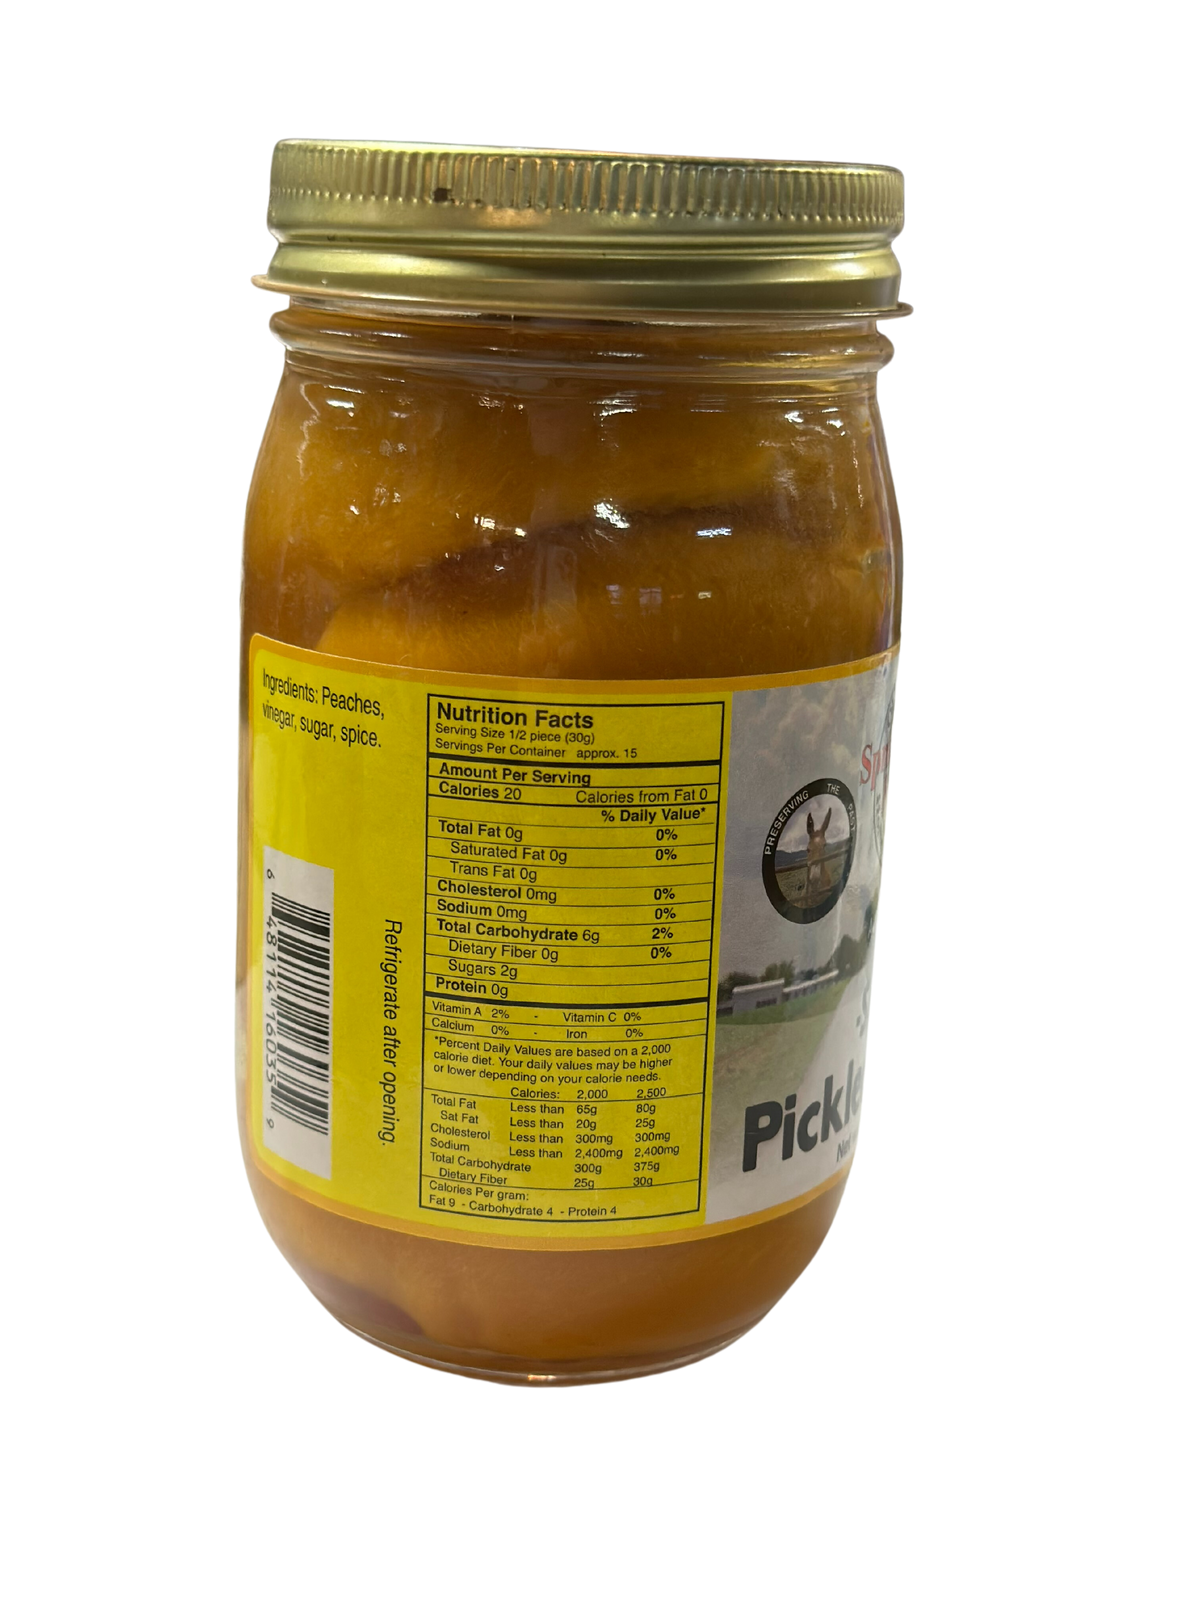 Spring Valley Farms Spiced Pickled Peaches